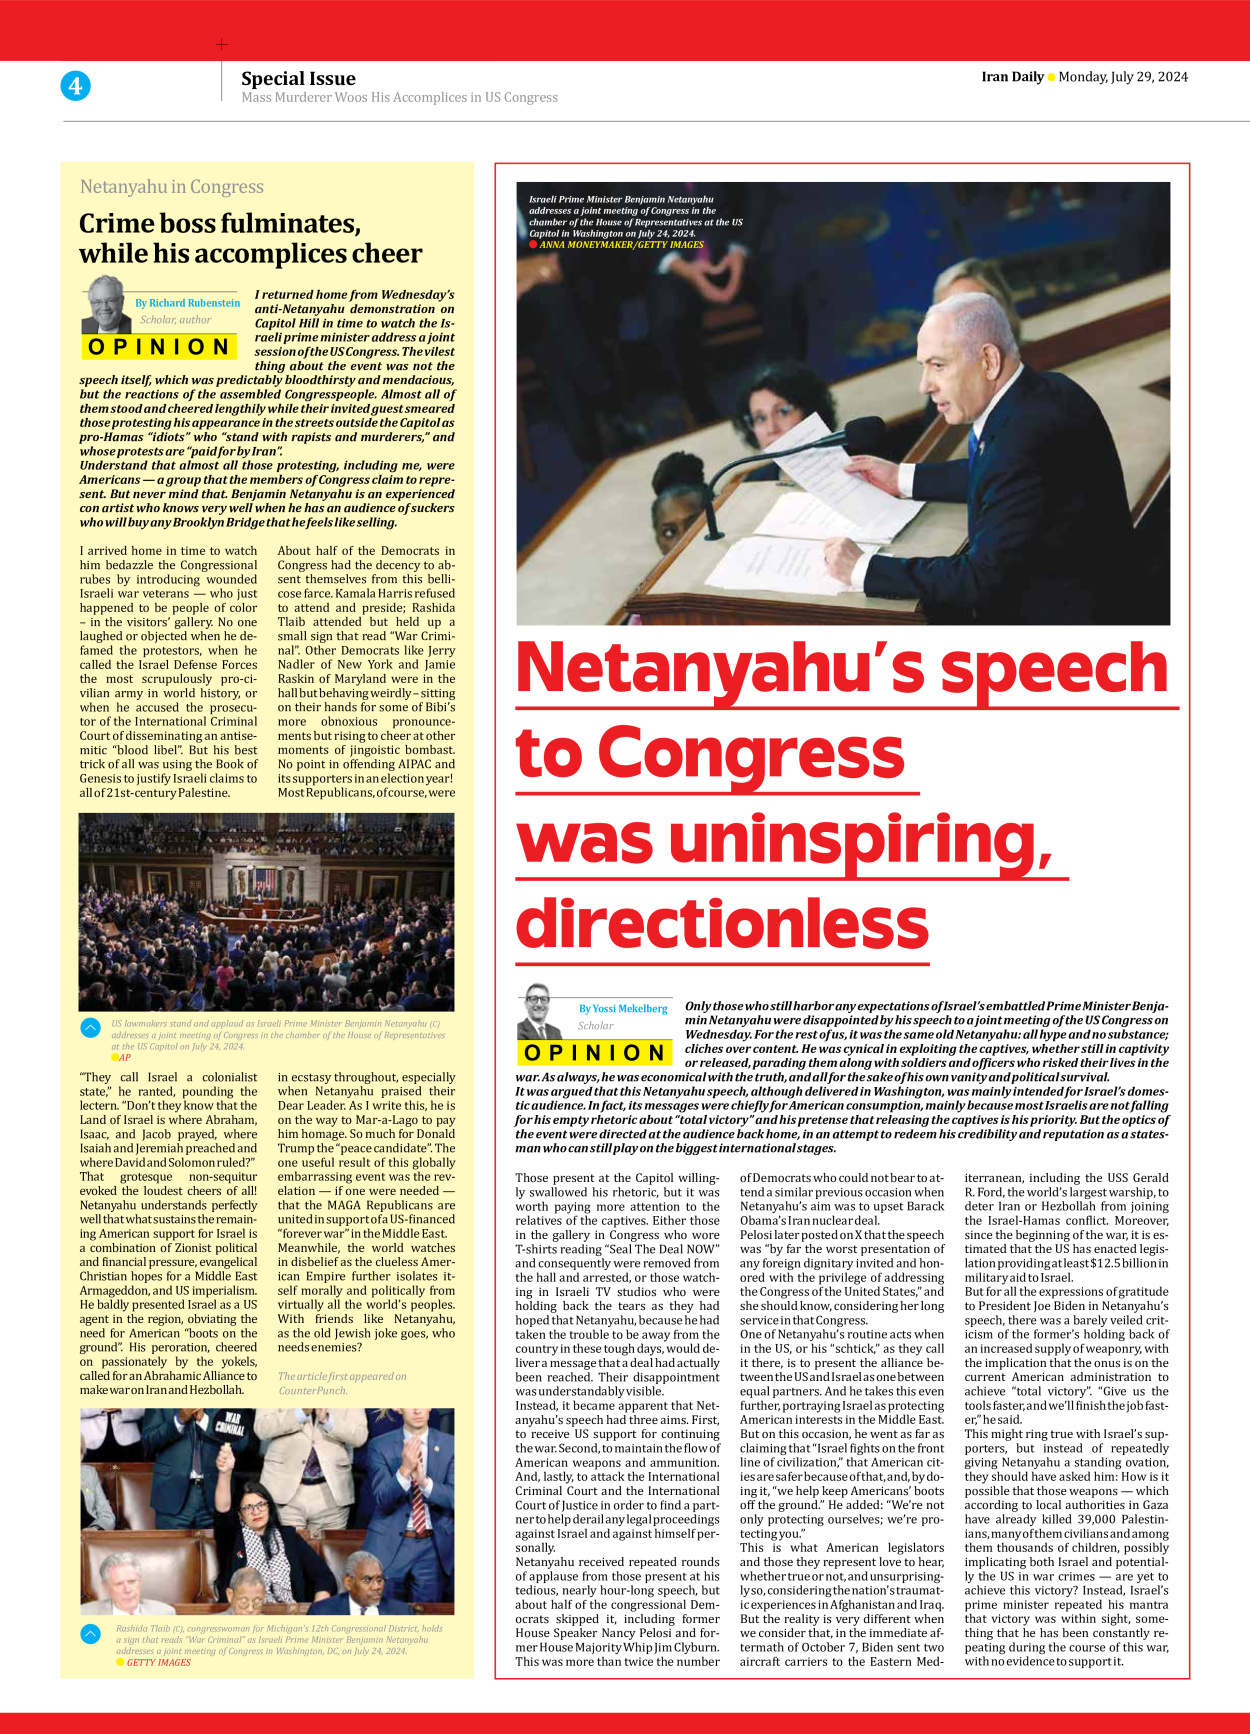 Iran Daily - Number Seven Thousand Six Hundred and Fourteen - 29 July 2024 - Page 4